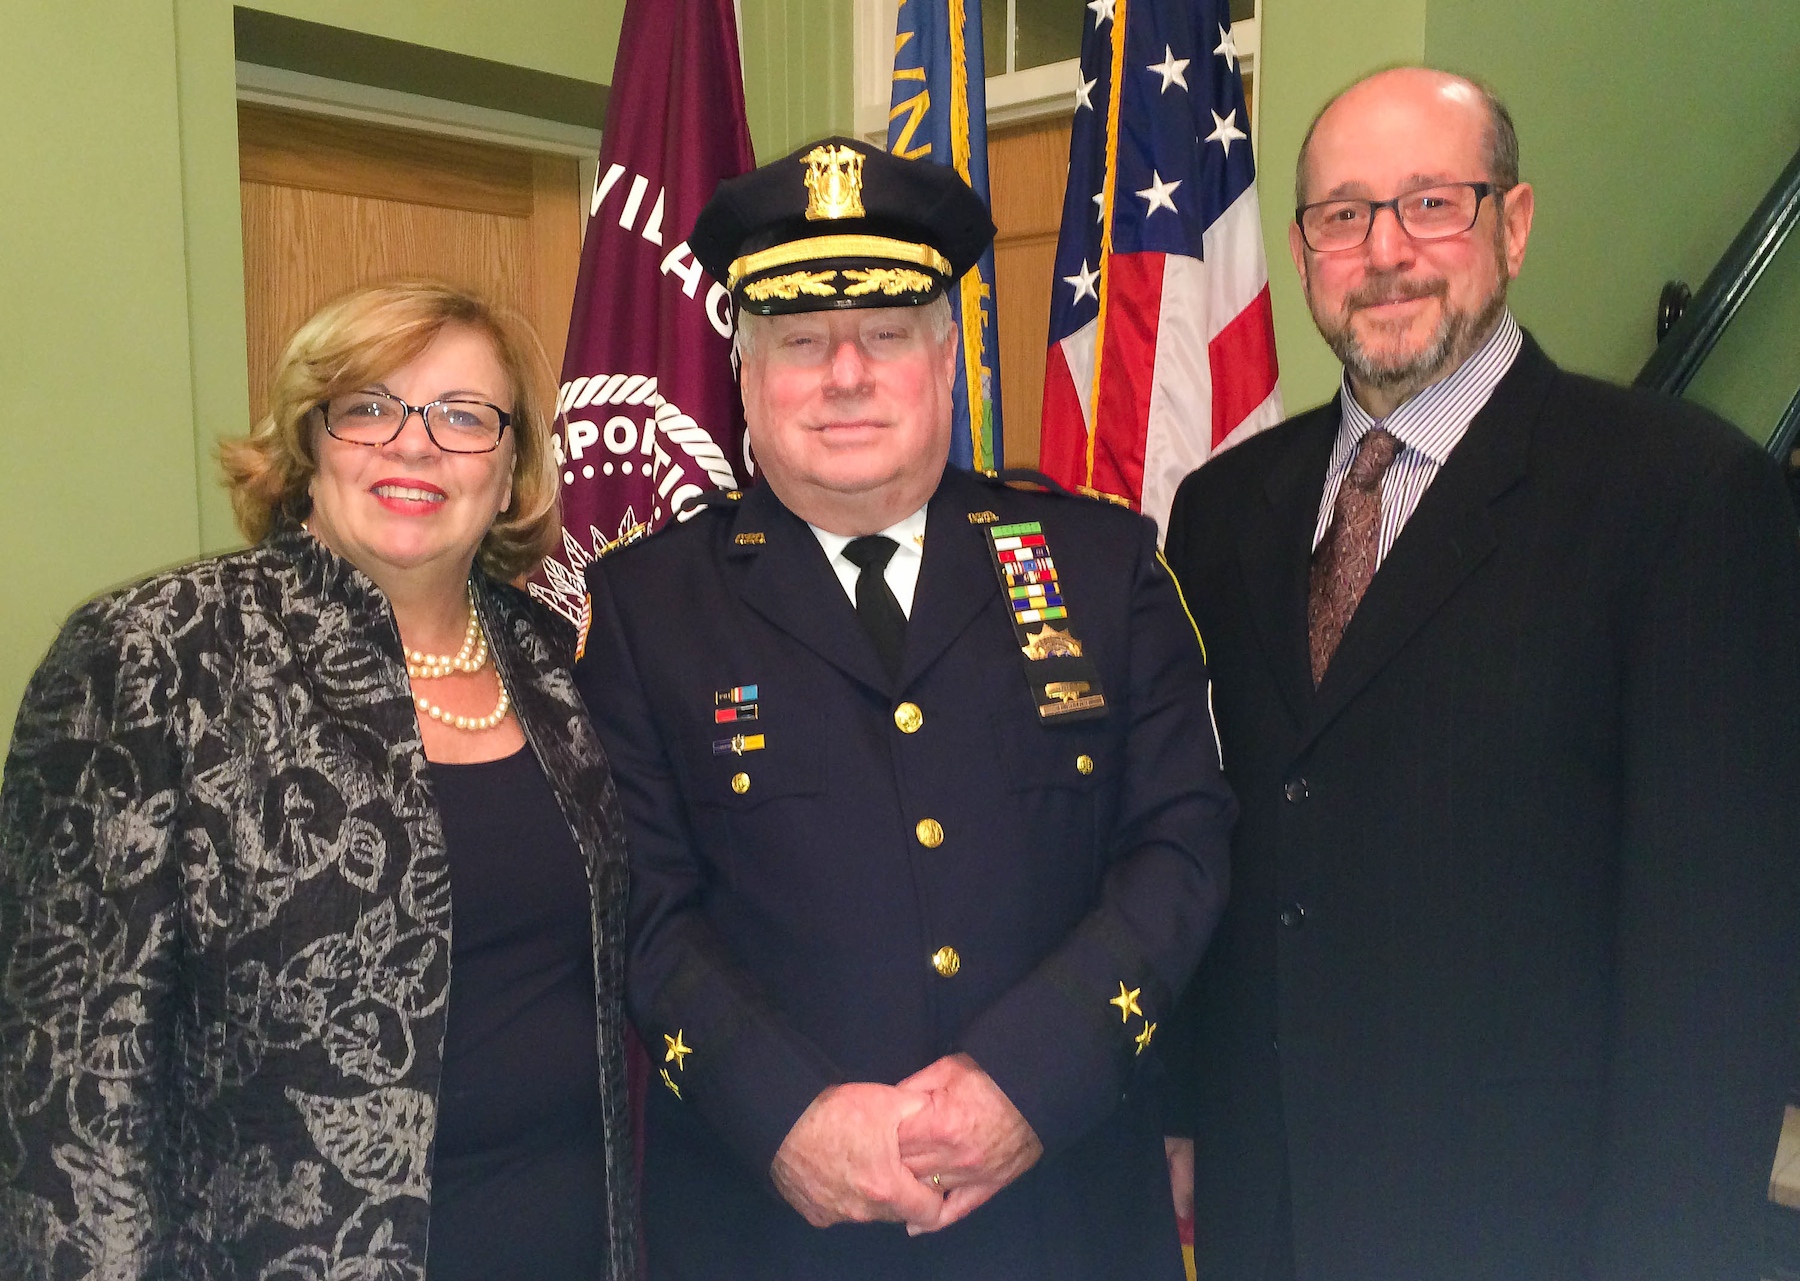 Left to right: Ossining Town Supervisor Sue Donnelly, Village Police Chief Joe Burton, and Village of Ossining Mayor William Hanauer